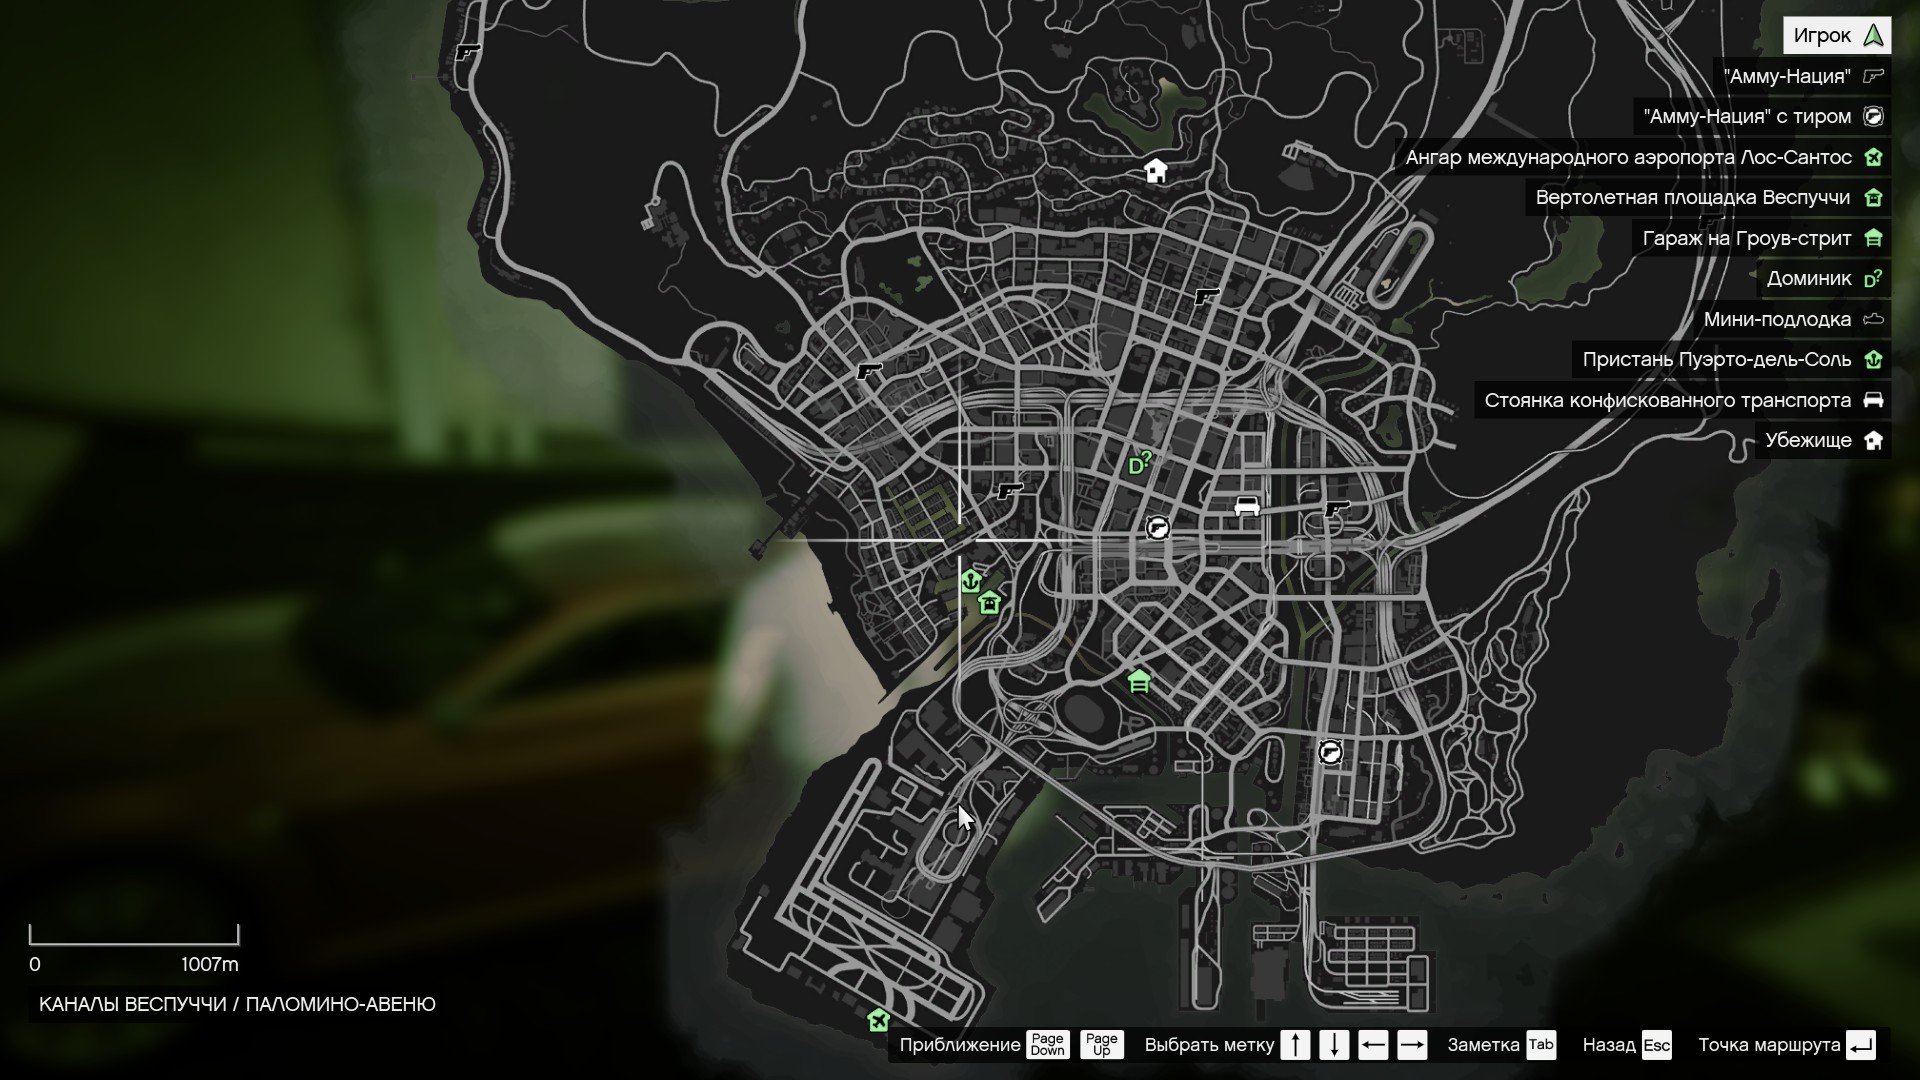 Grand Theft Auto V Completion Guide - Playthrough - Collect 50 pieces of a spaceship, 2 part - E1F7724